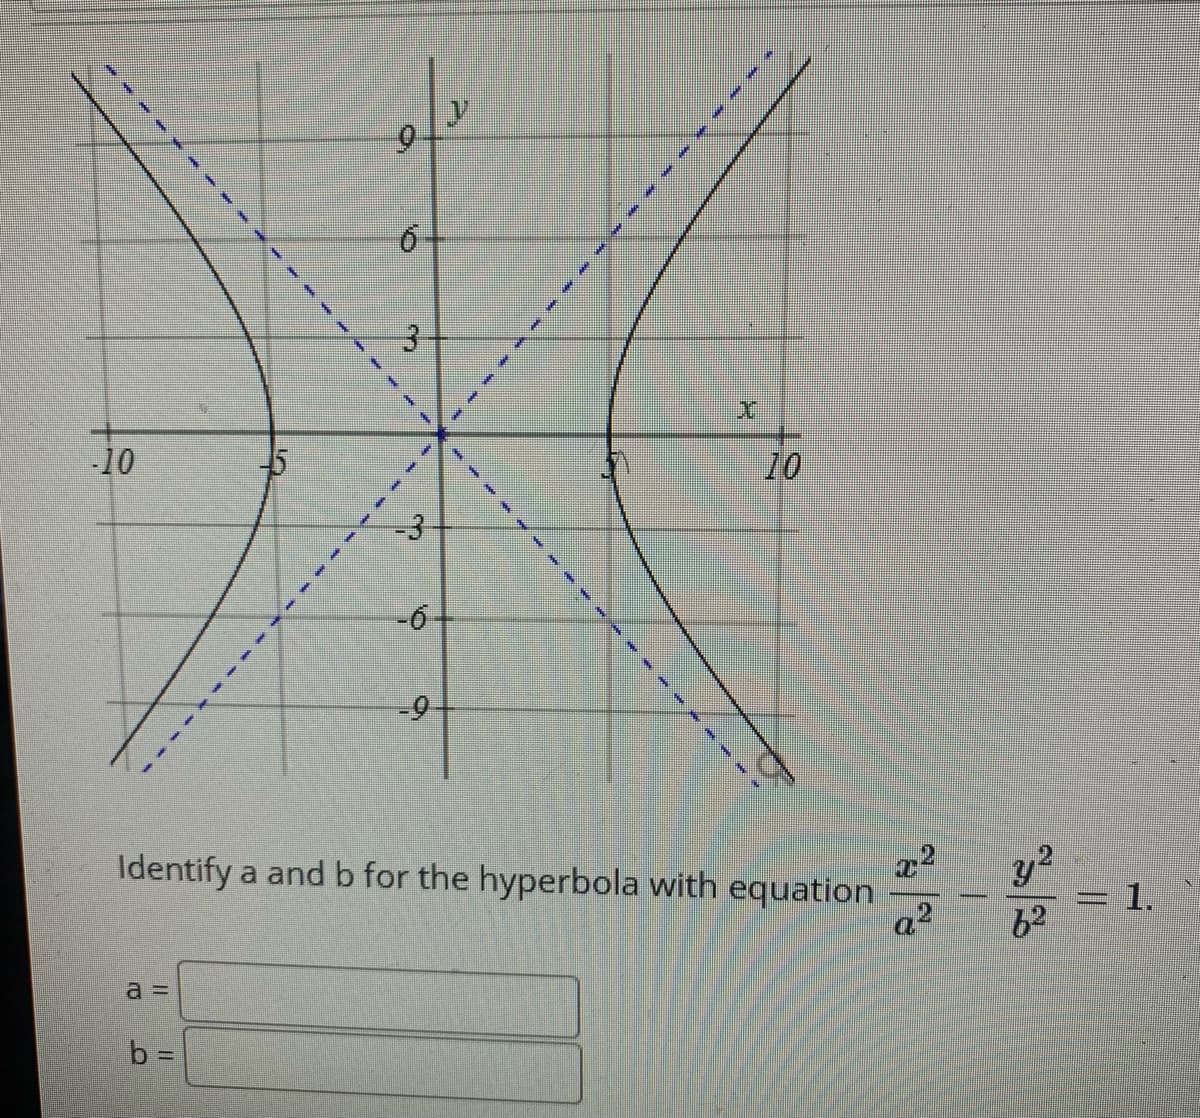 6
-10
10
-6
-9
Identify a and b for the hyperbola with equation
y2
1.
62
b =
